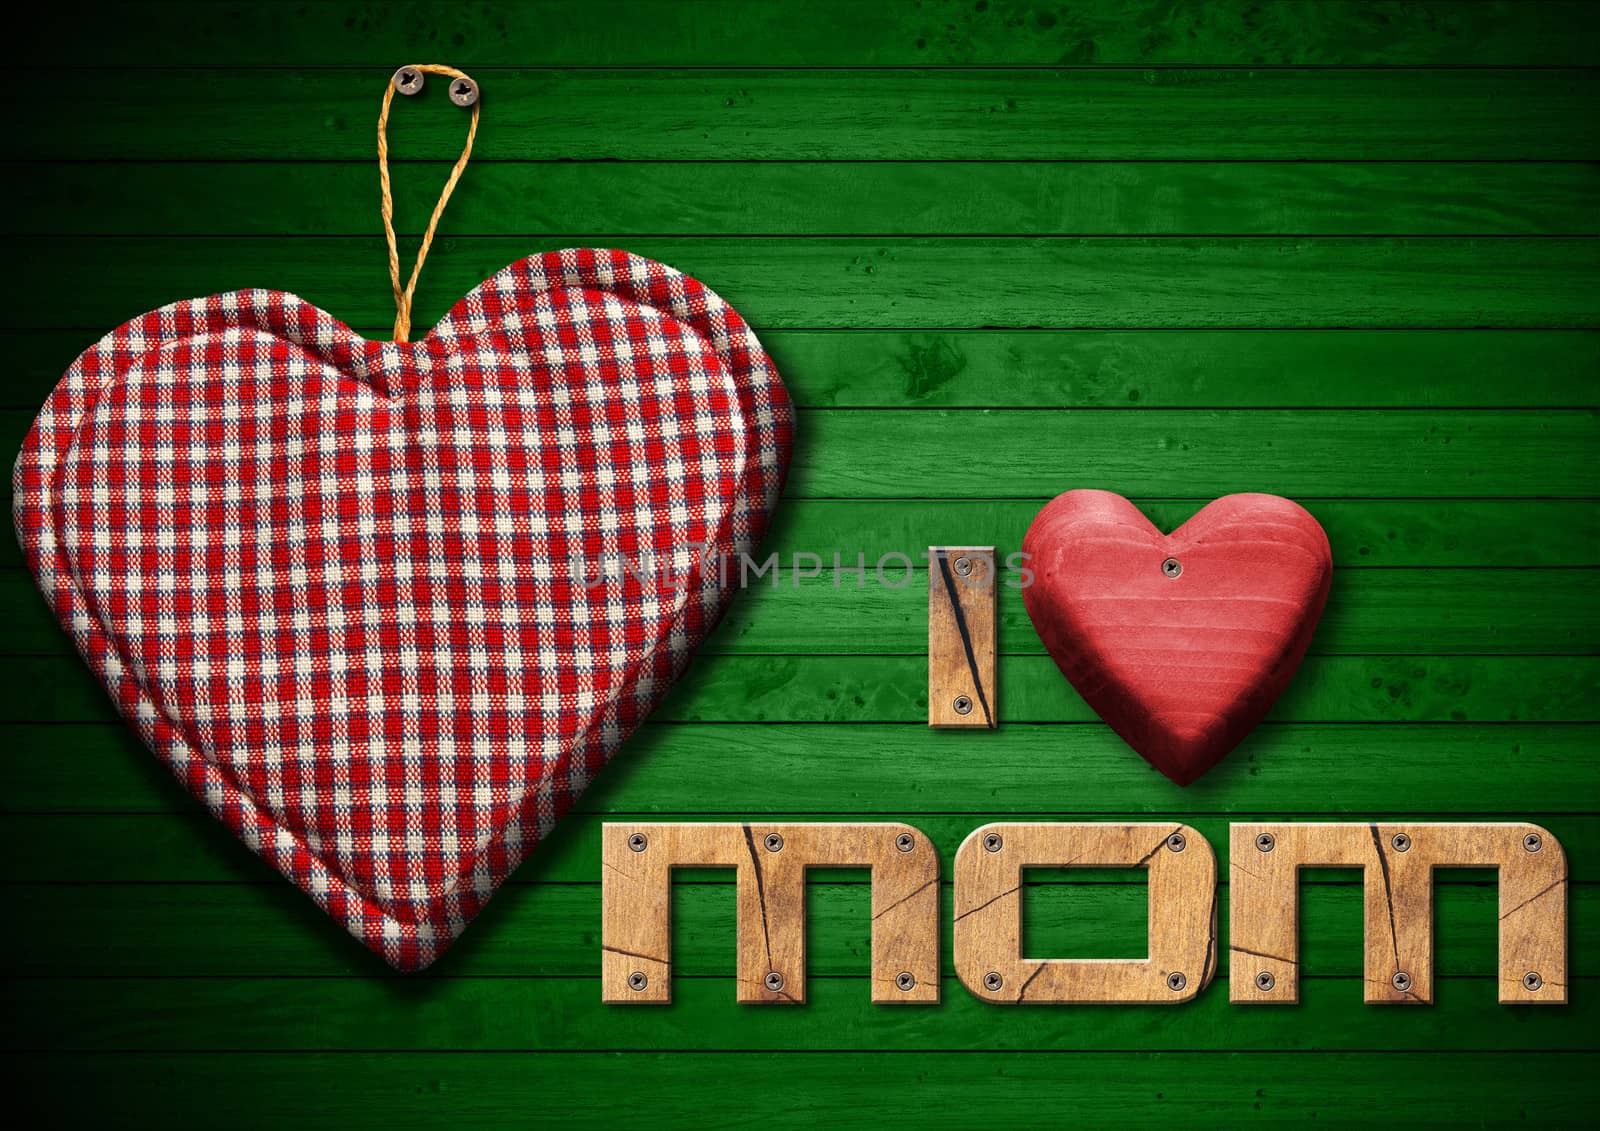 I Love Mom written with wooden letters and red wooden hearts, handmade cloth heart hanging on green wooden background